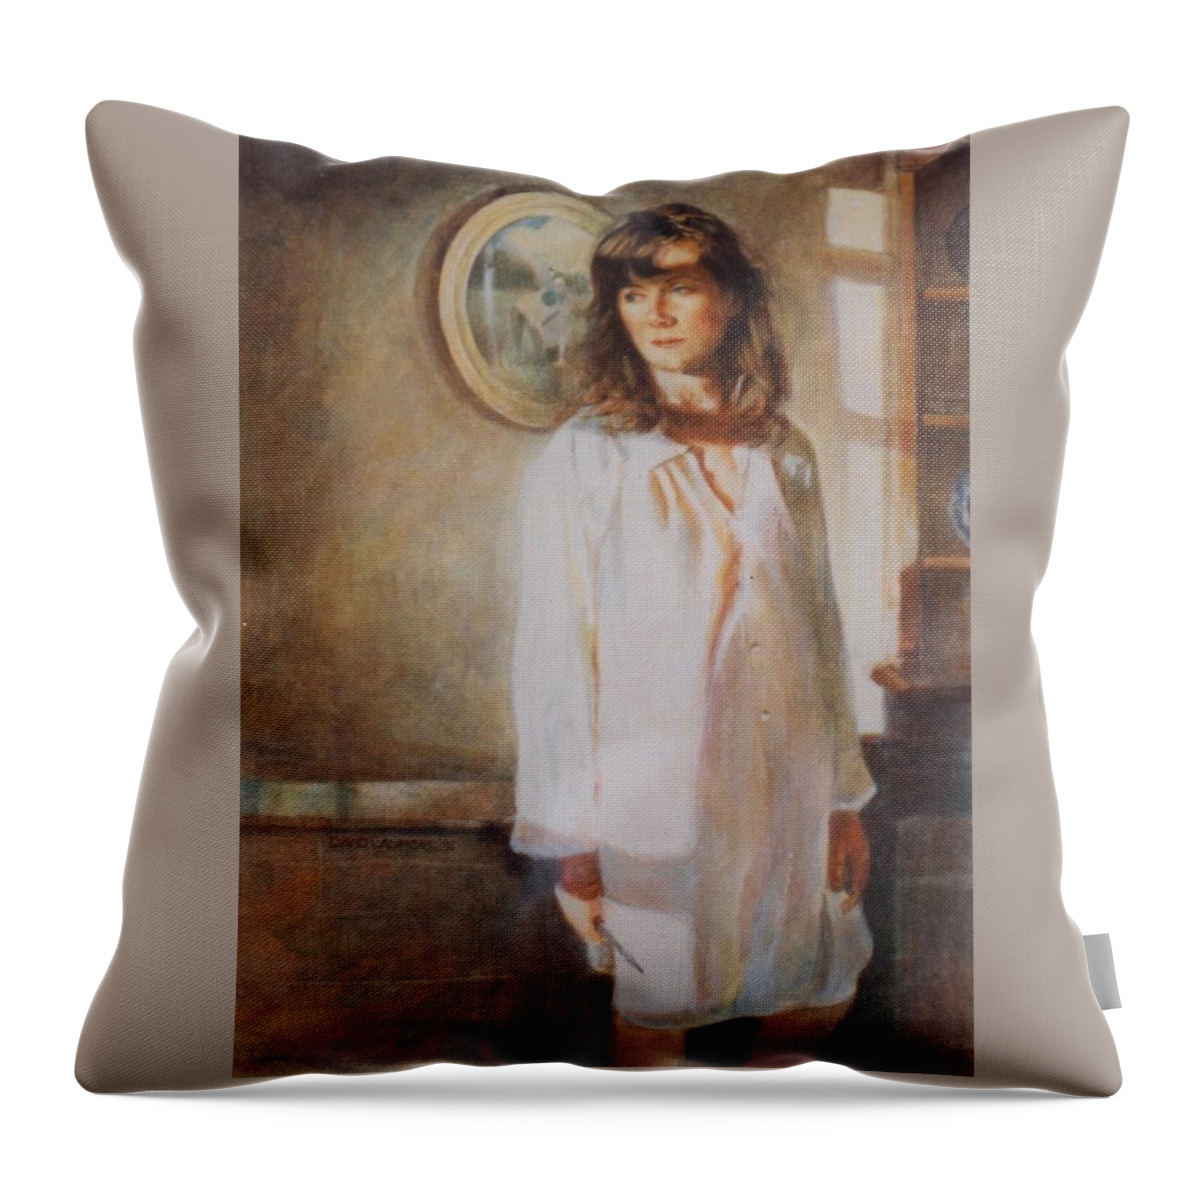 Portrait Throw Pillow featuring the painting The Old Watercolour by David Ladmore